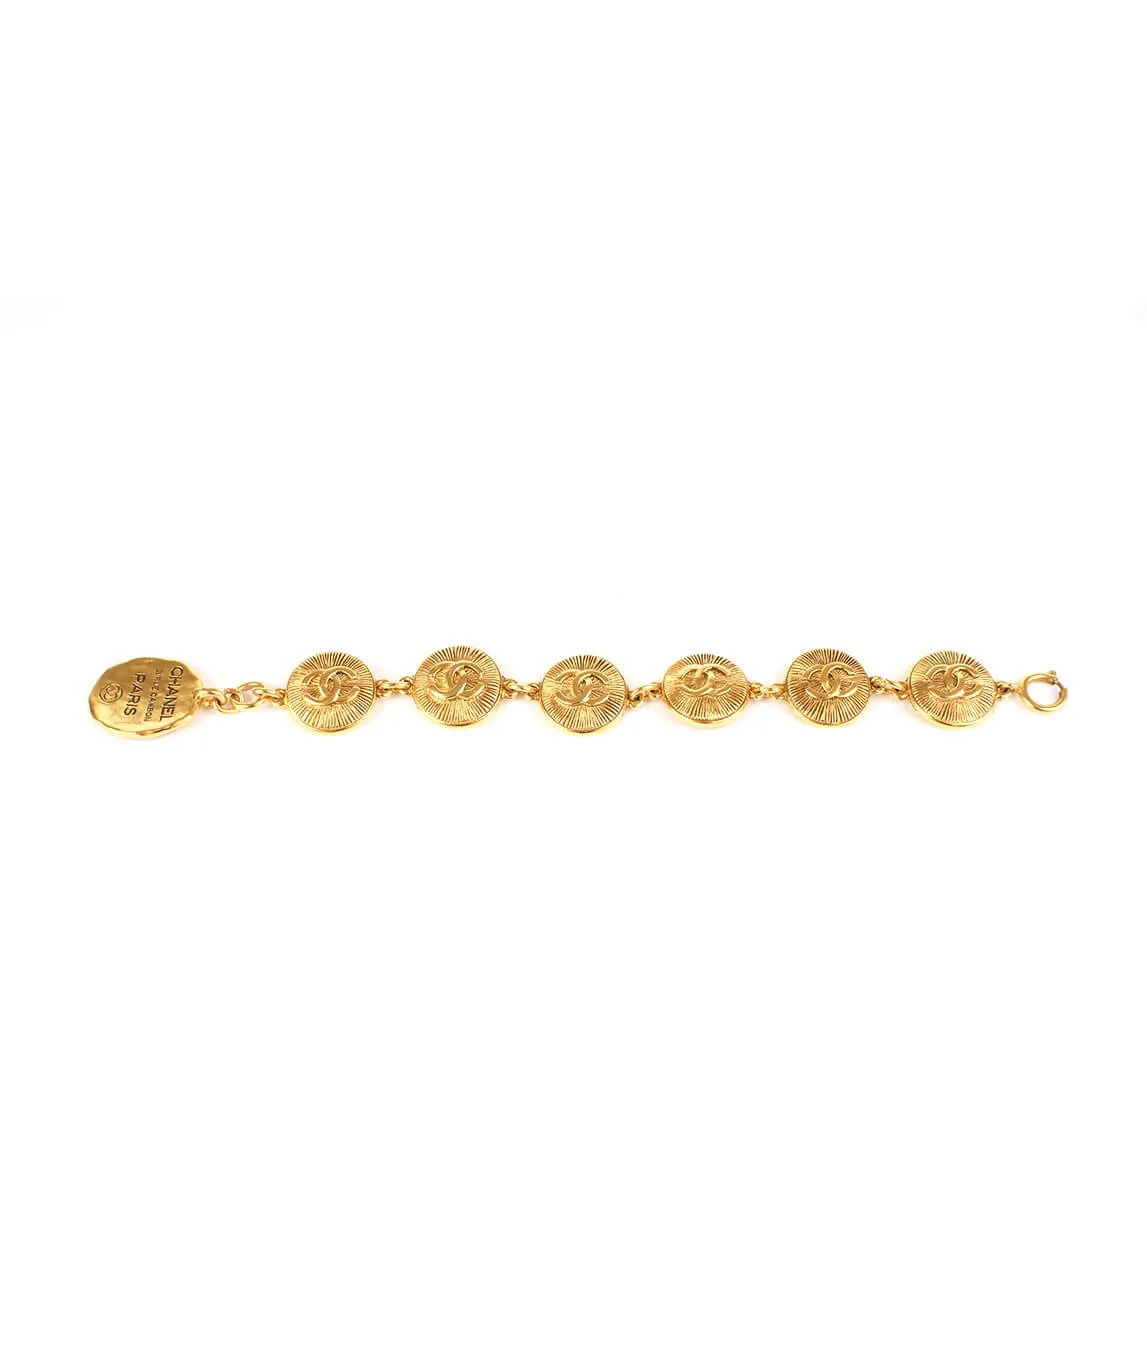 Chanel 31 Rue Cambon gold plated bracelet